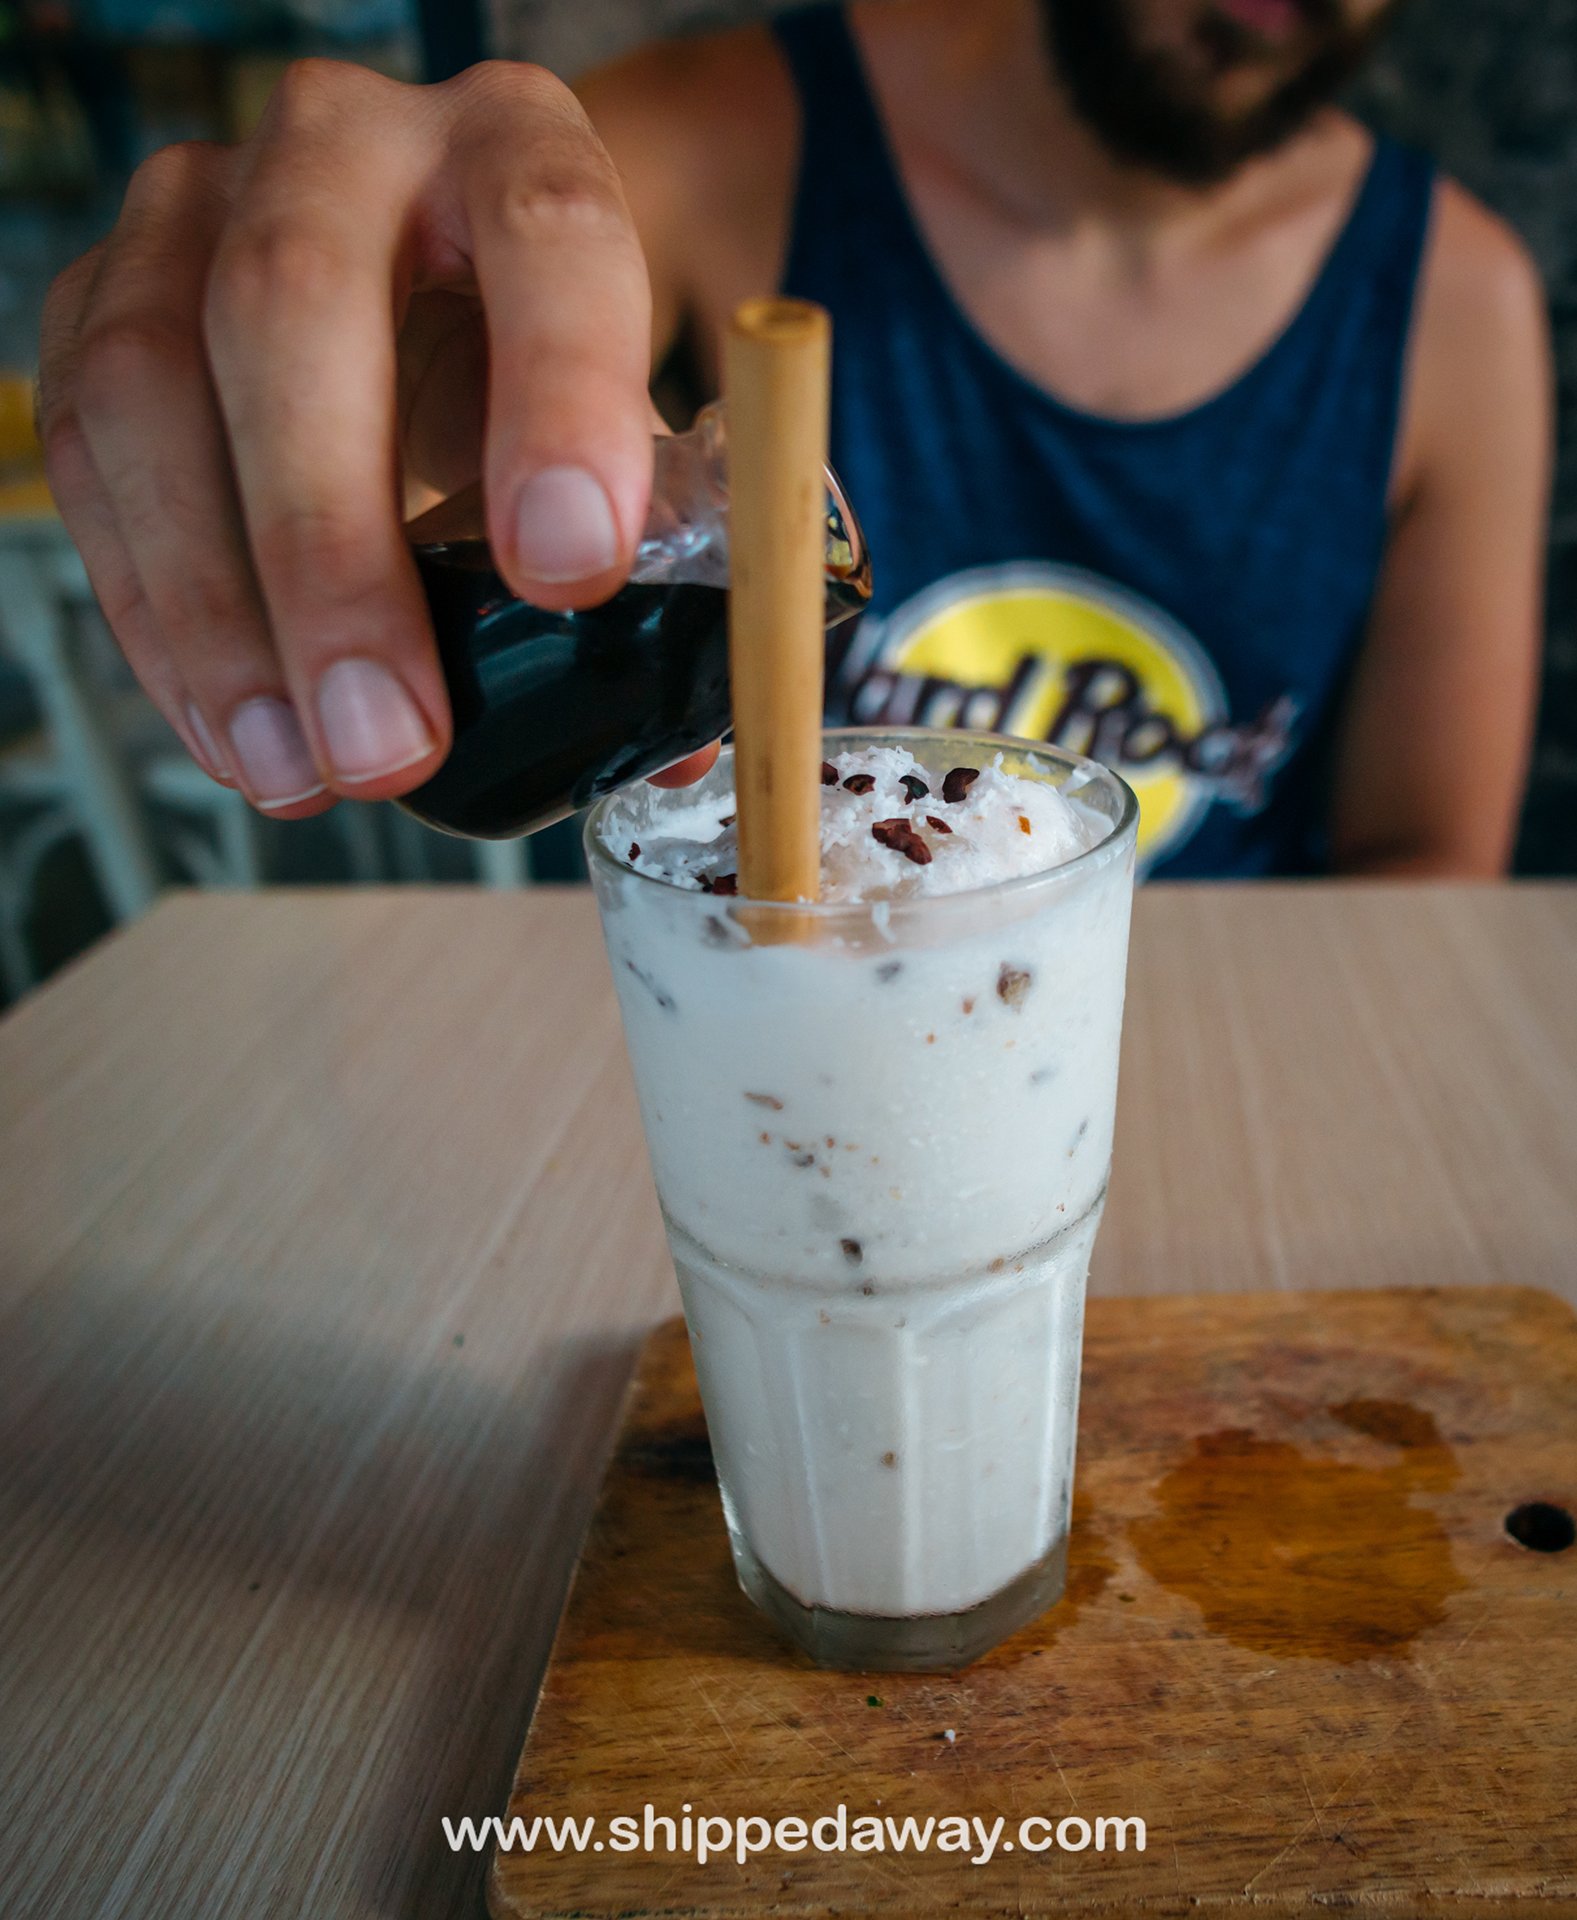 top things to do in Chiang Mai, Chiang Mai attractions - cafe culture - coffee culture - ice coffee